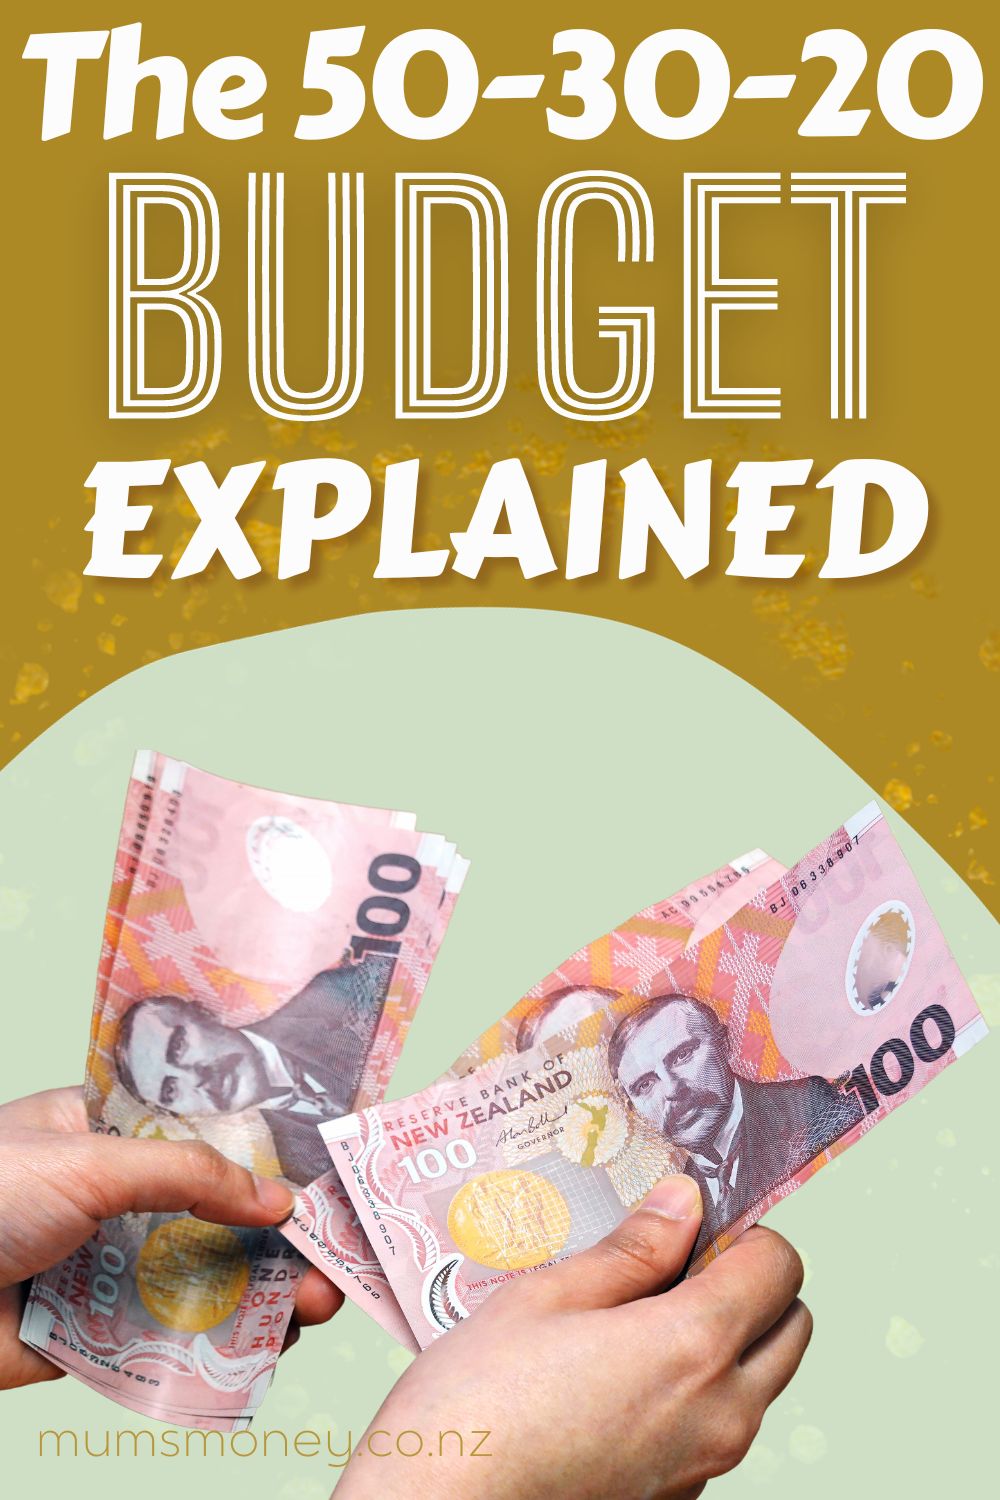 The 50-30-20 Budget Explained